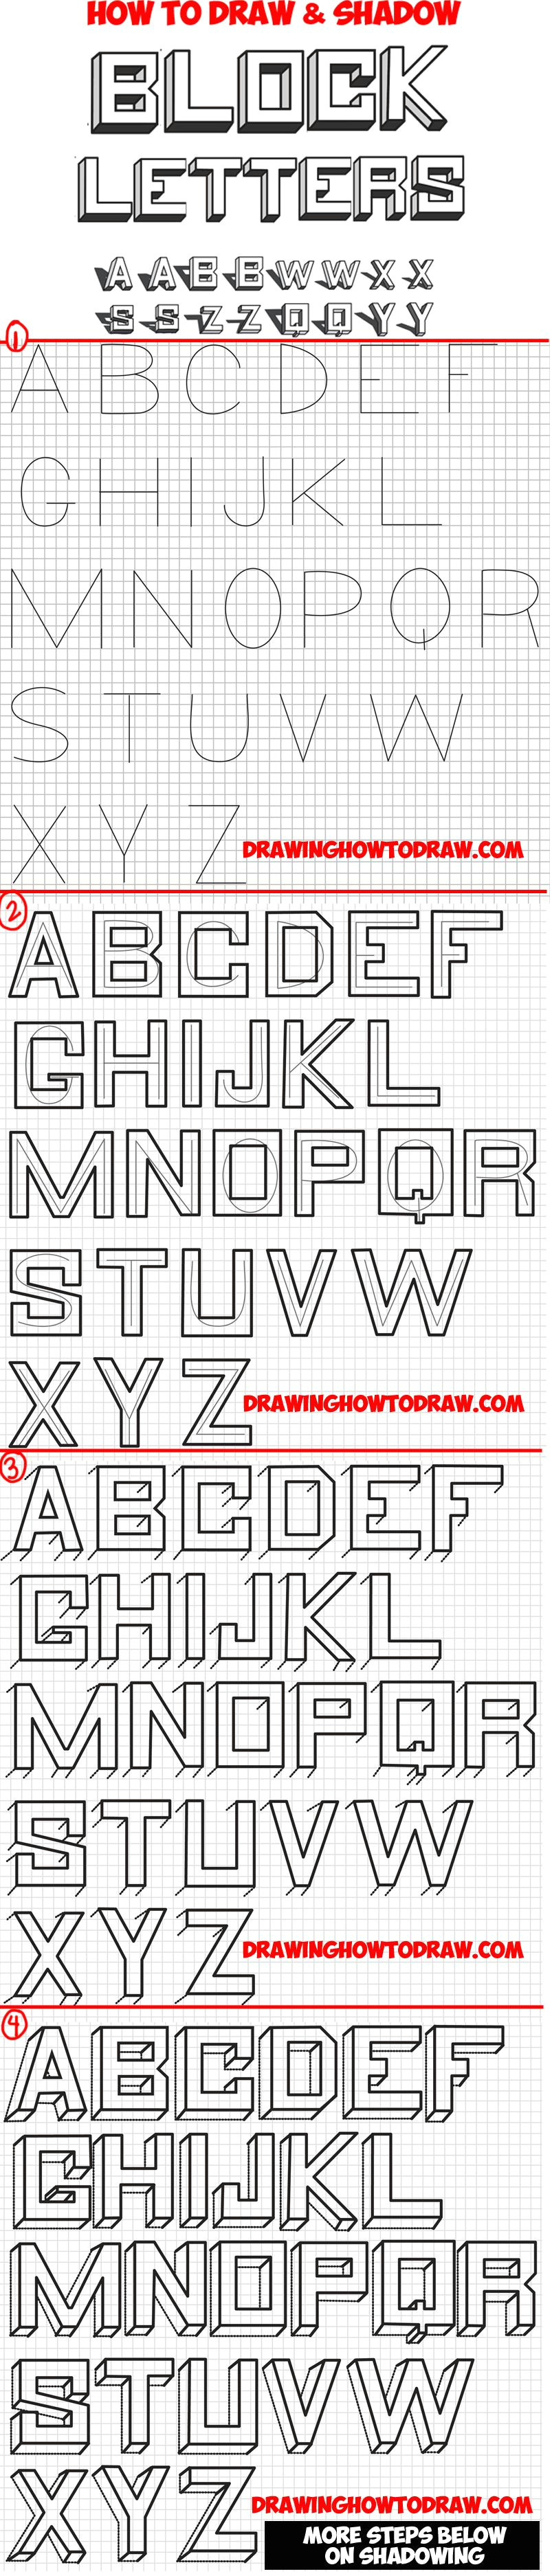 3 Dimensional Drawing Easy How to Draw 3d Block Letters Drawing 3 Dimensional Bubble Letters